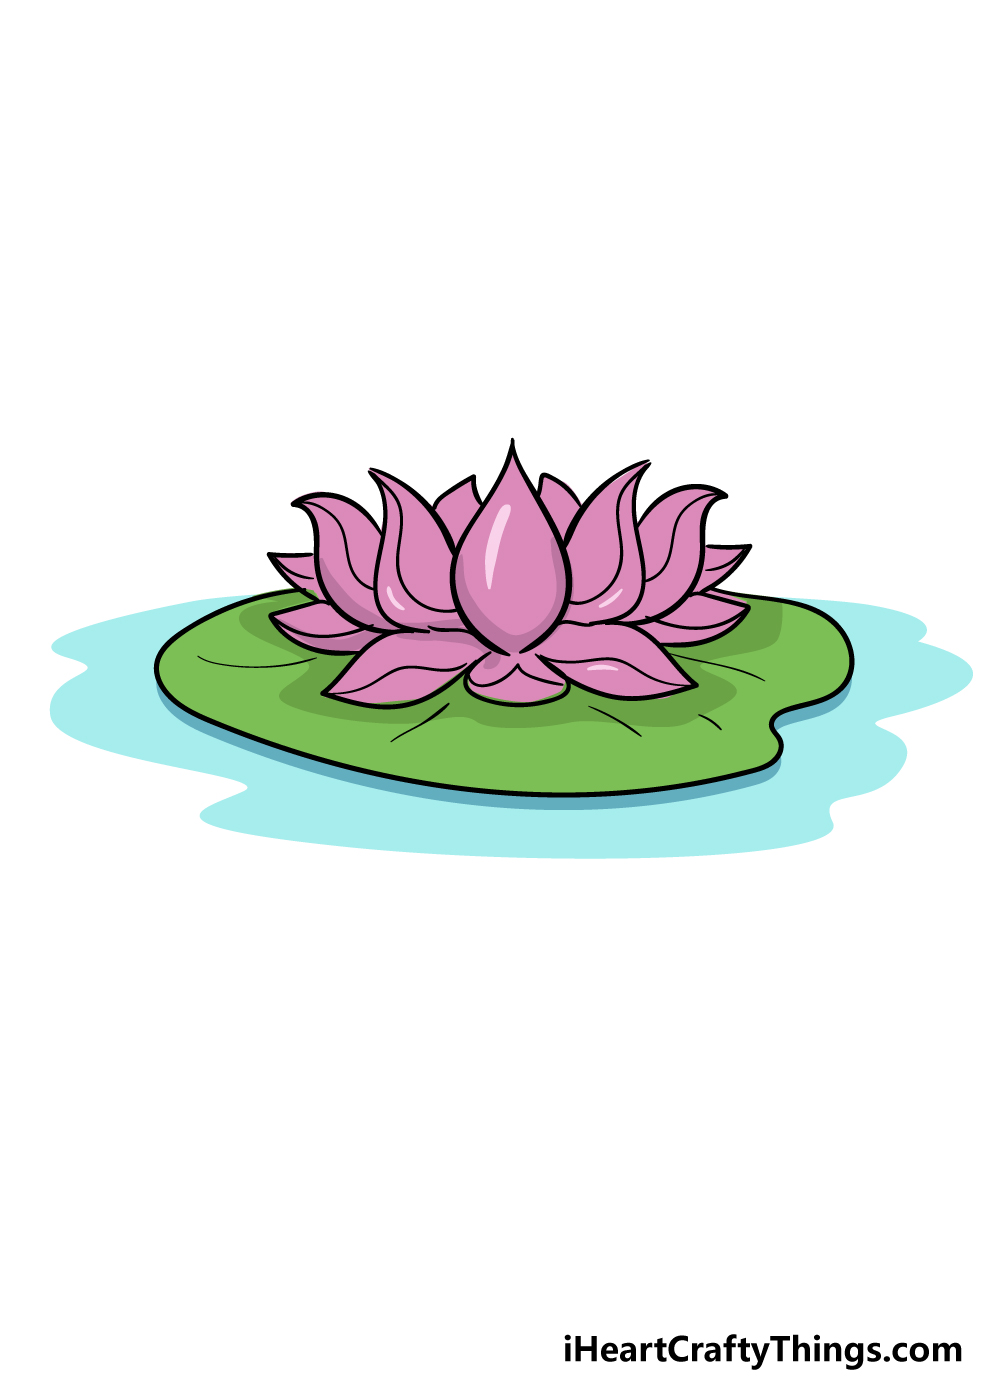 How To Make A Lotus Drawing Easy / How To Draw A Lotus Flower Very Easy  Step by step - YouTube